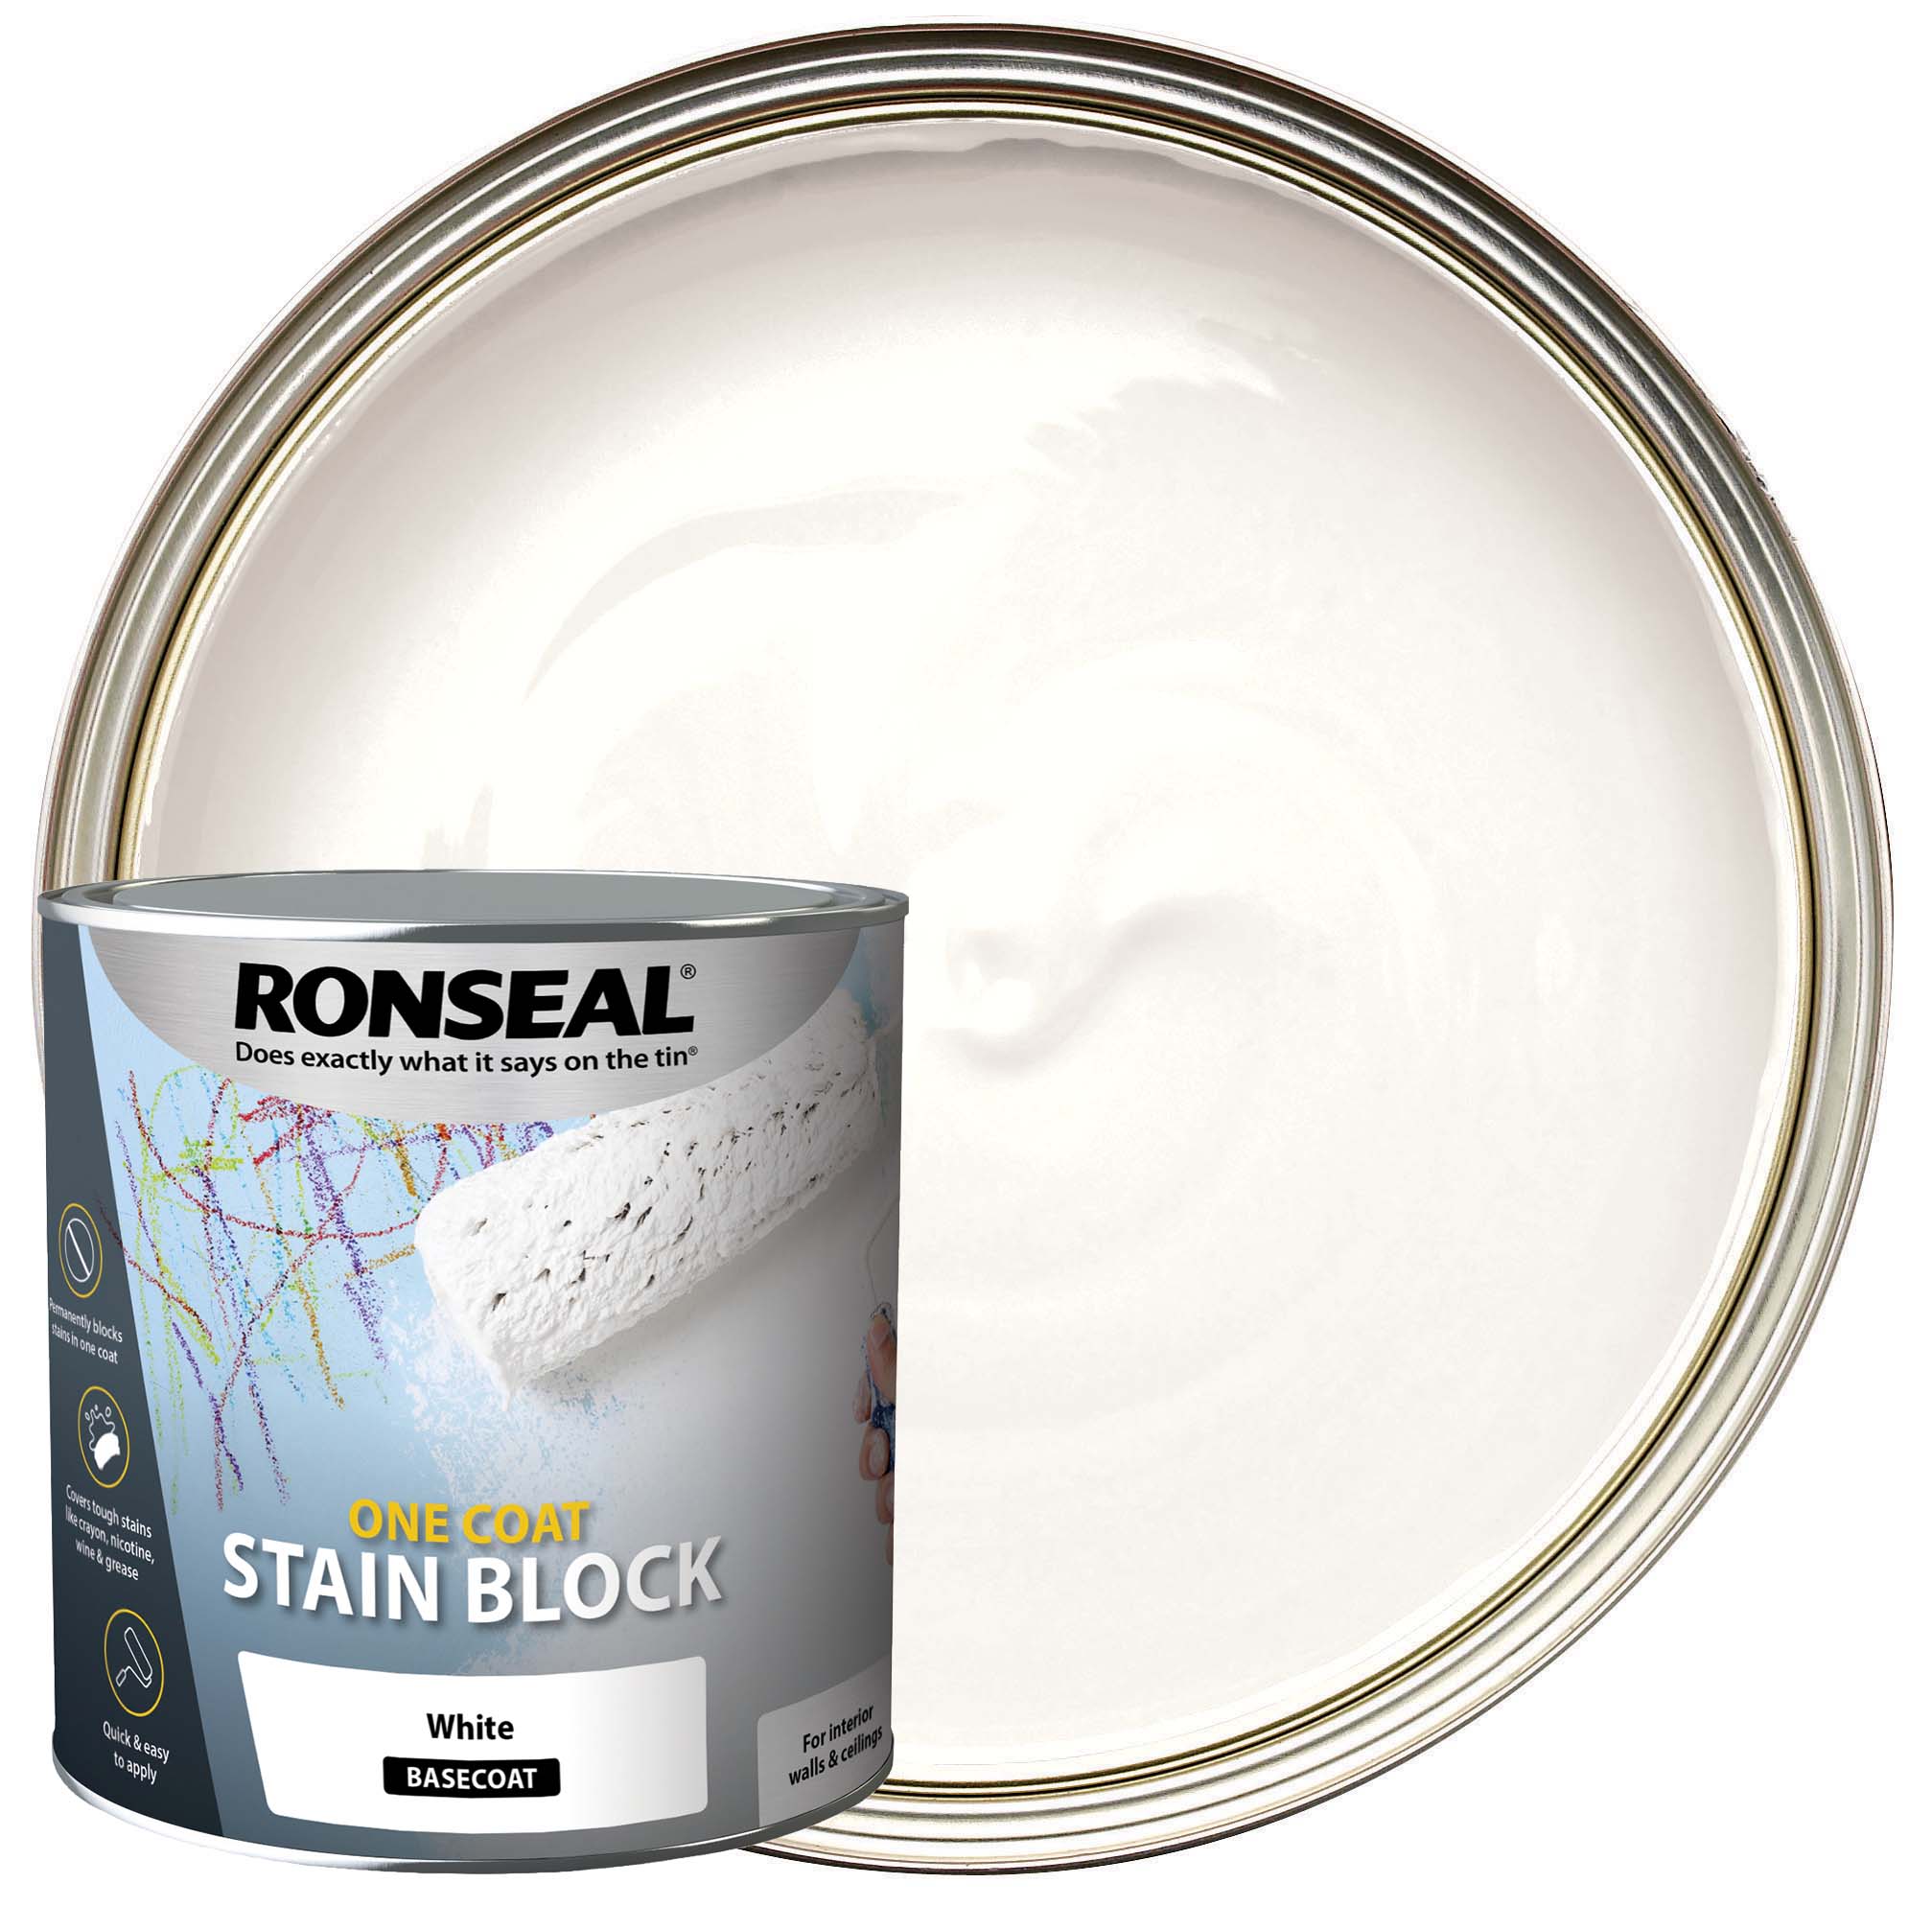 Image of Ronseal One Coat Stain Block White 2.5L